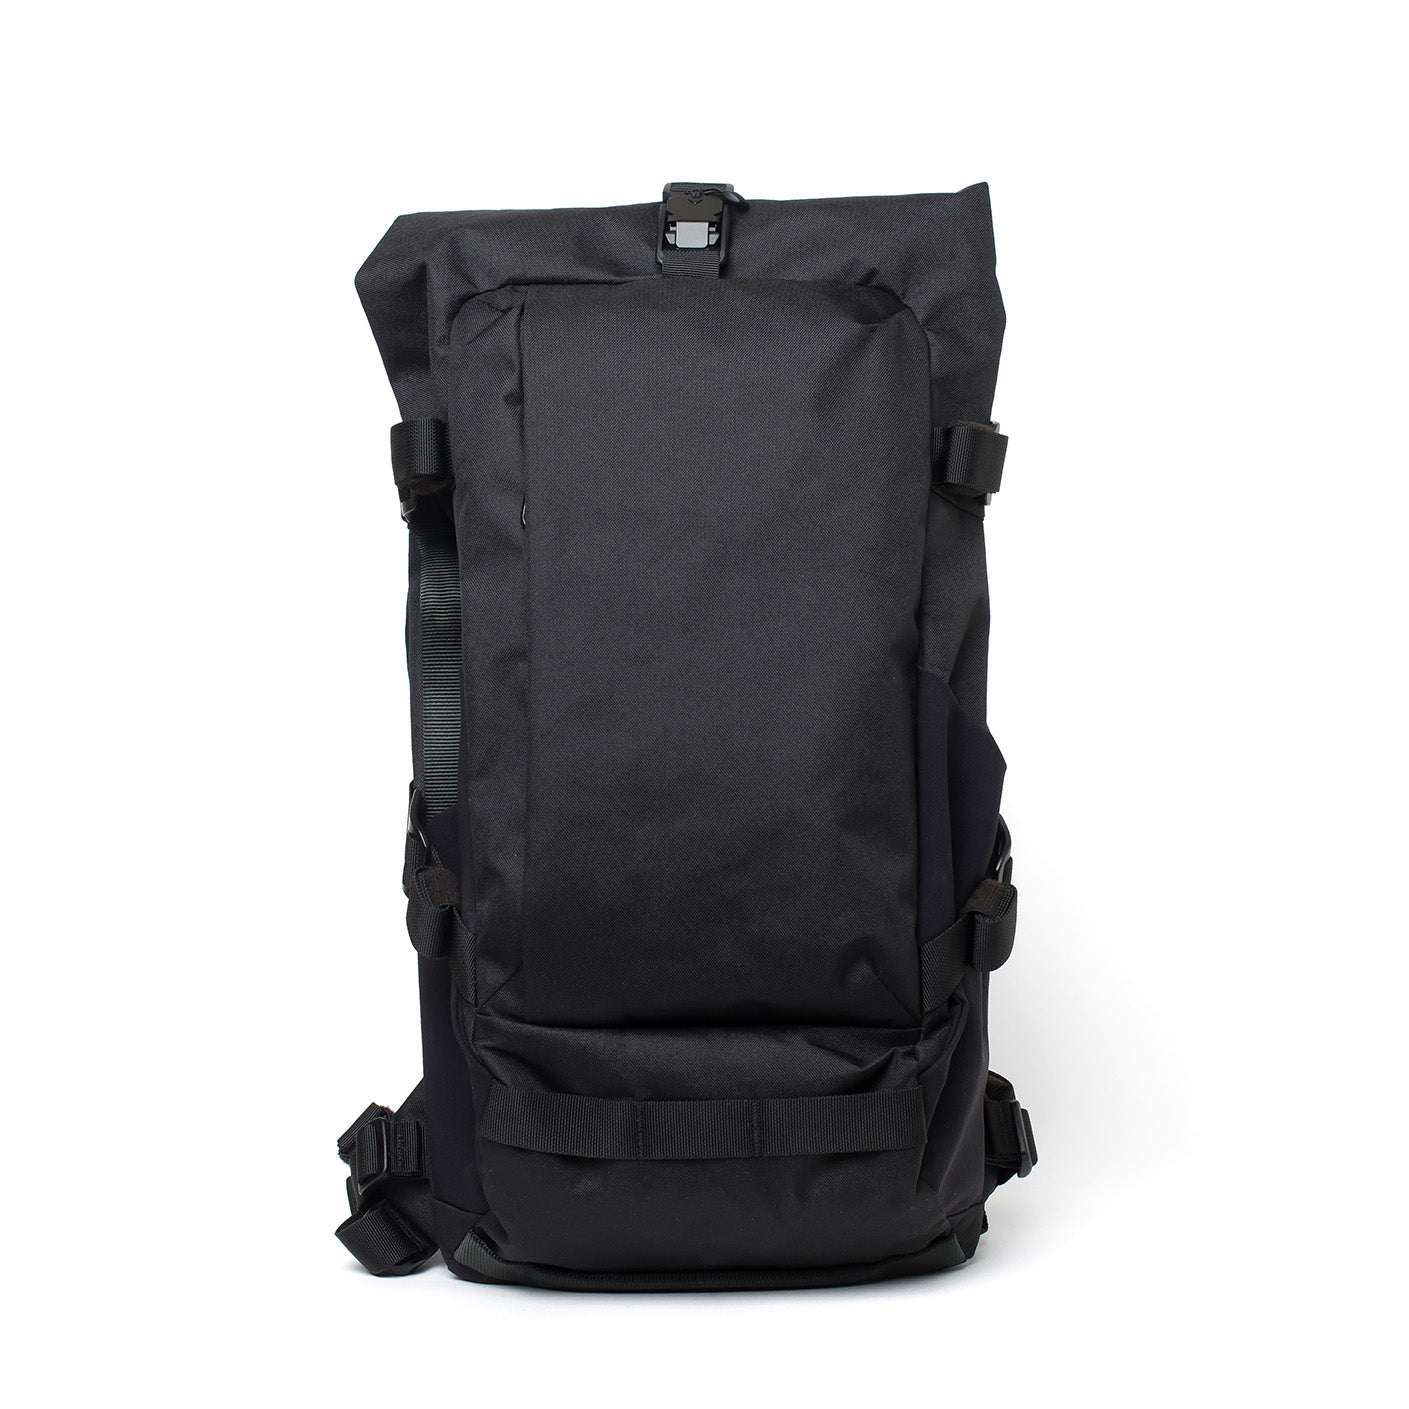 Attitude Supply ATD2 Backpack